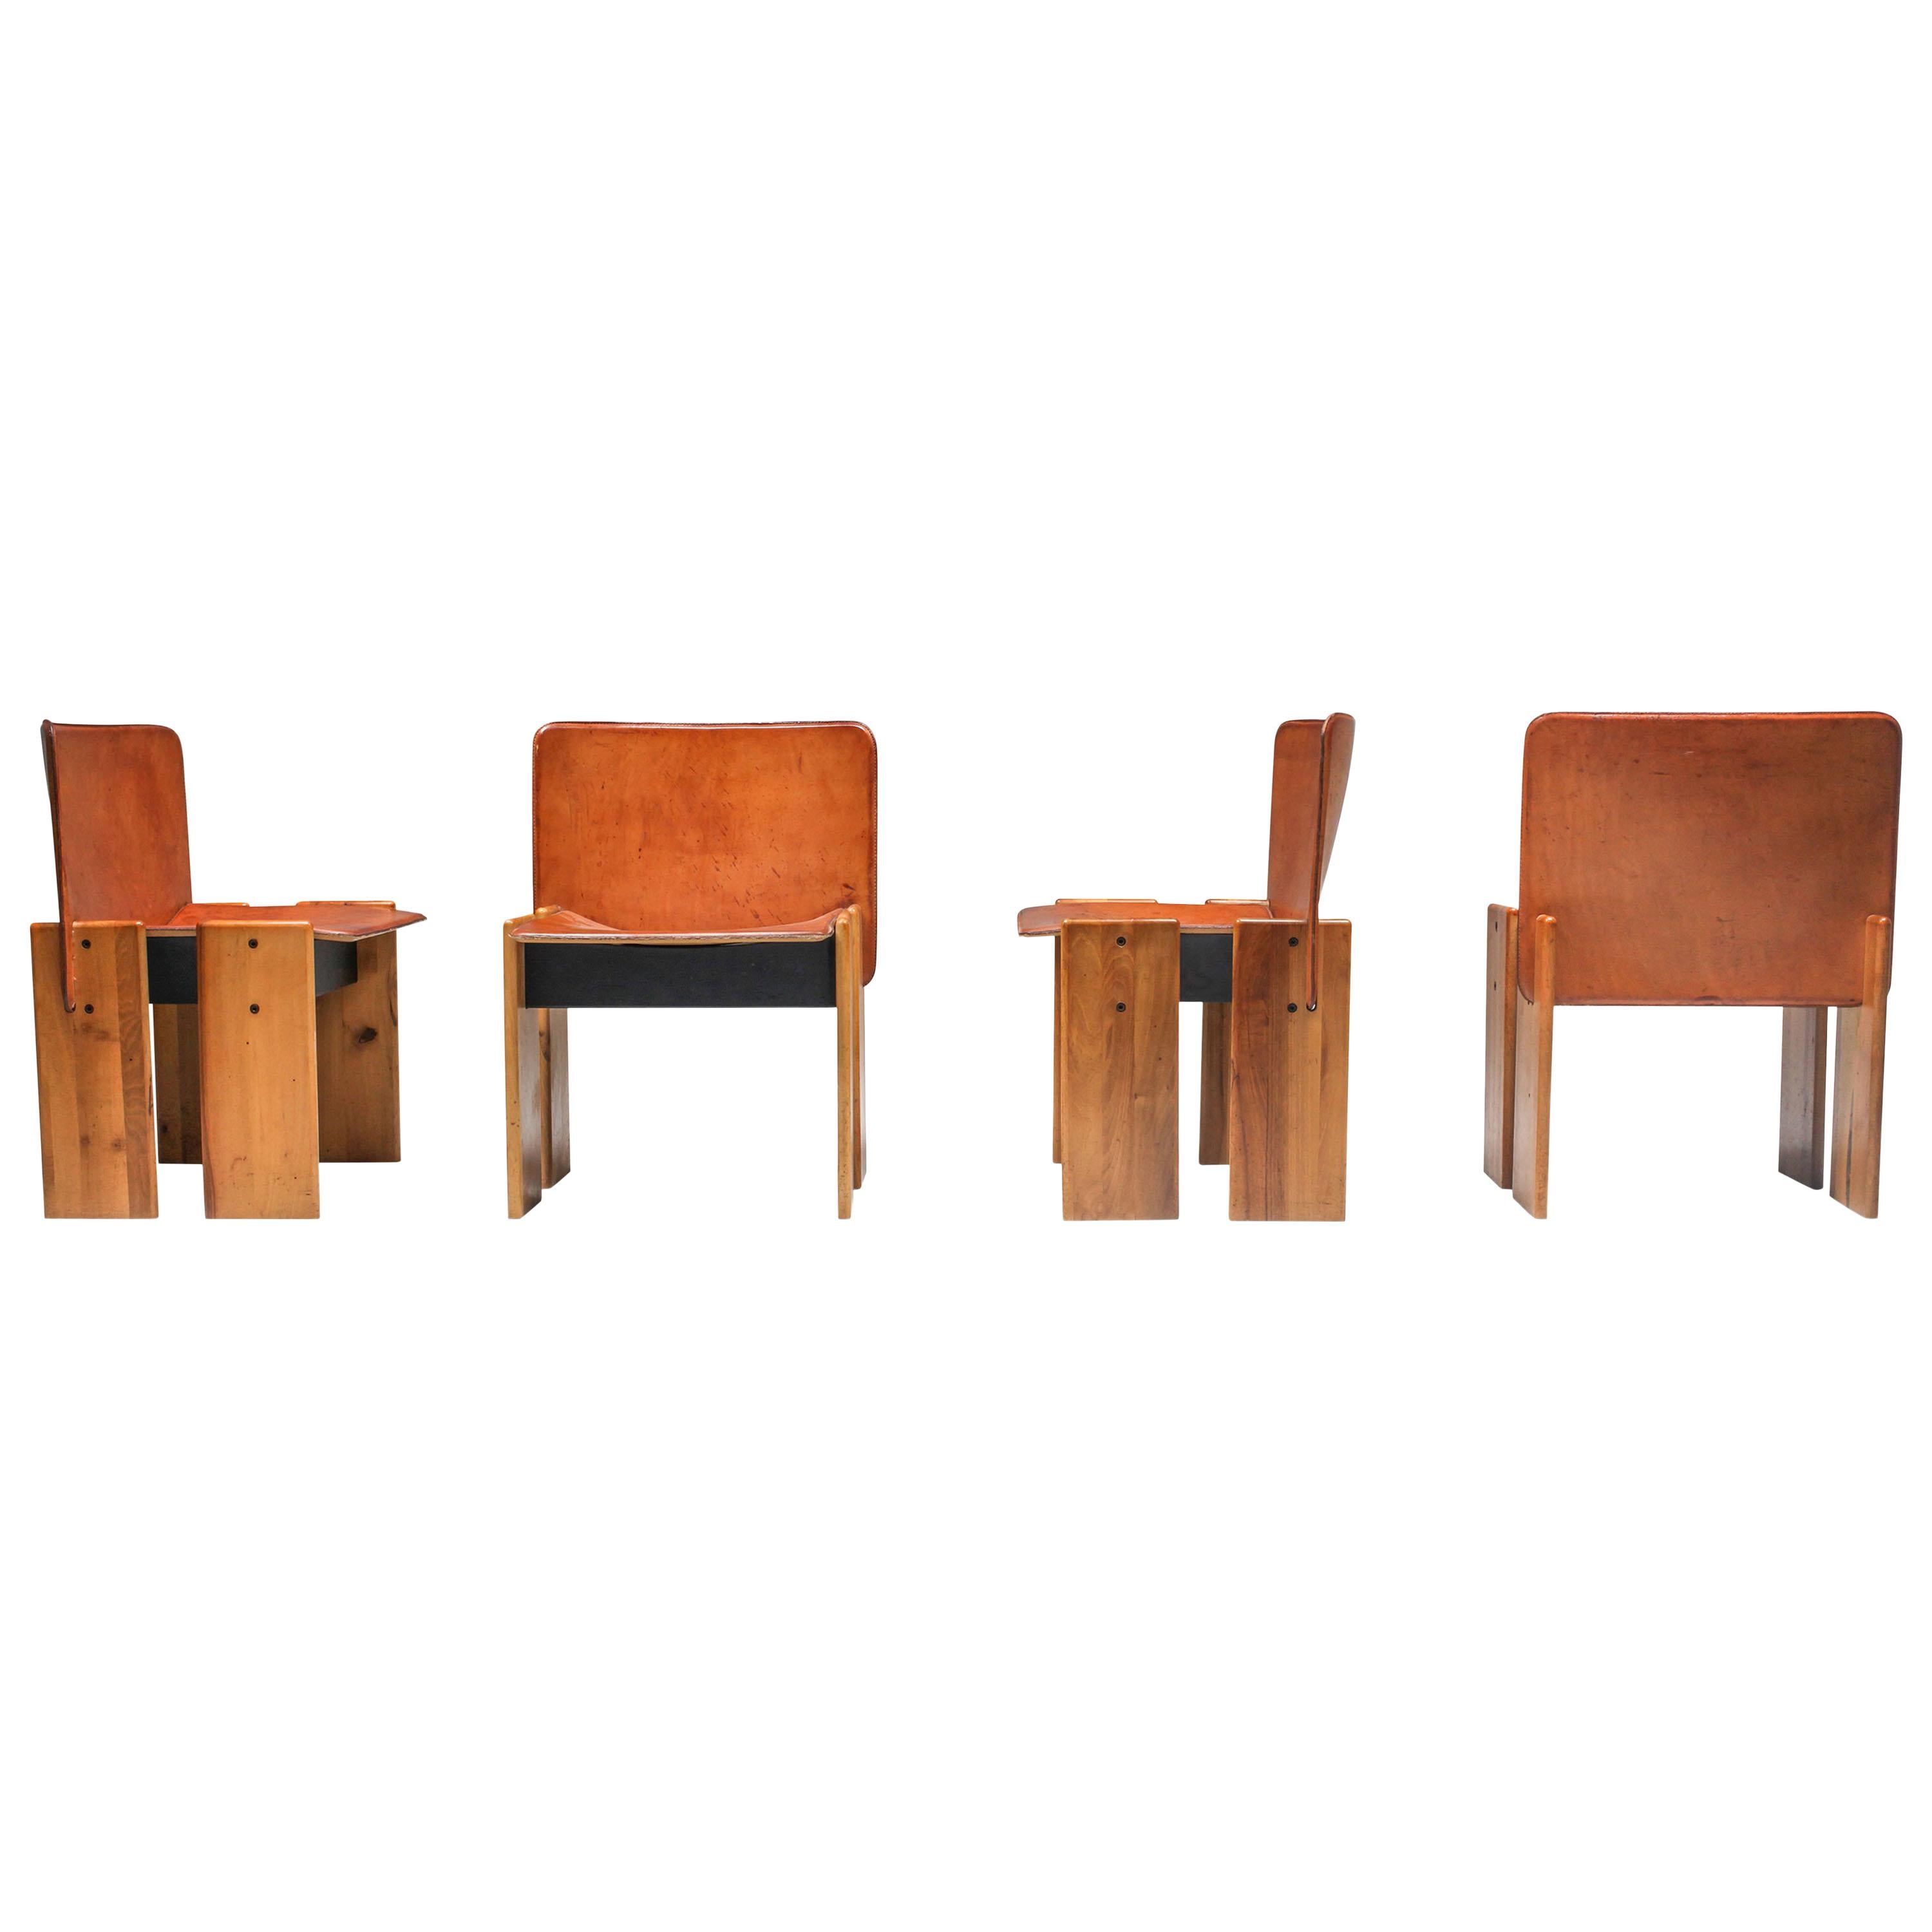 Afra & Tobia Scarpa Cognac Dining Chairs